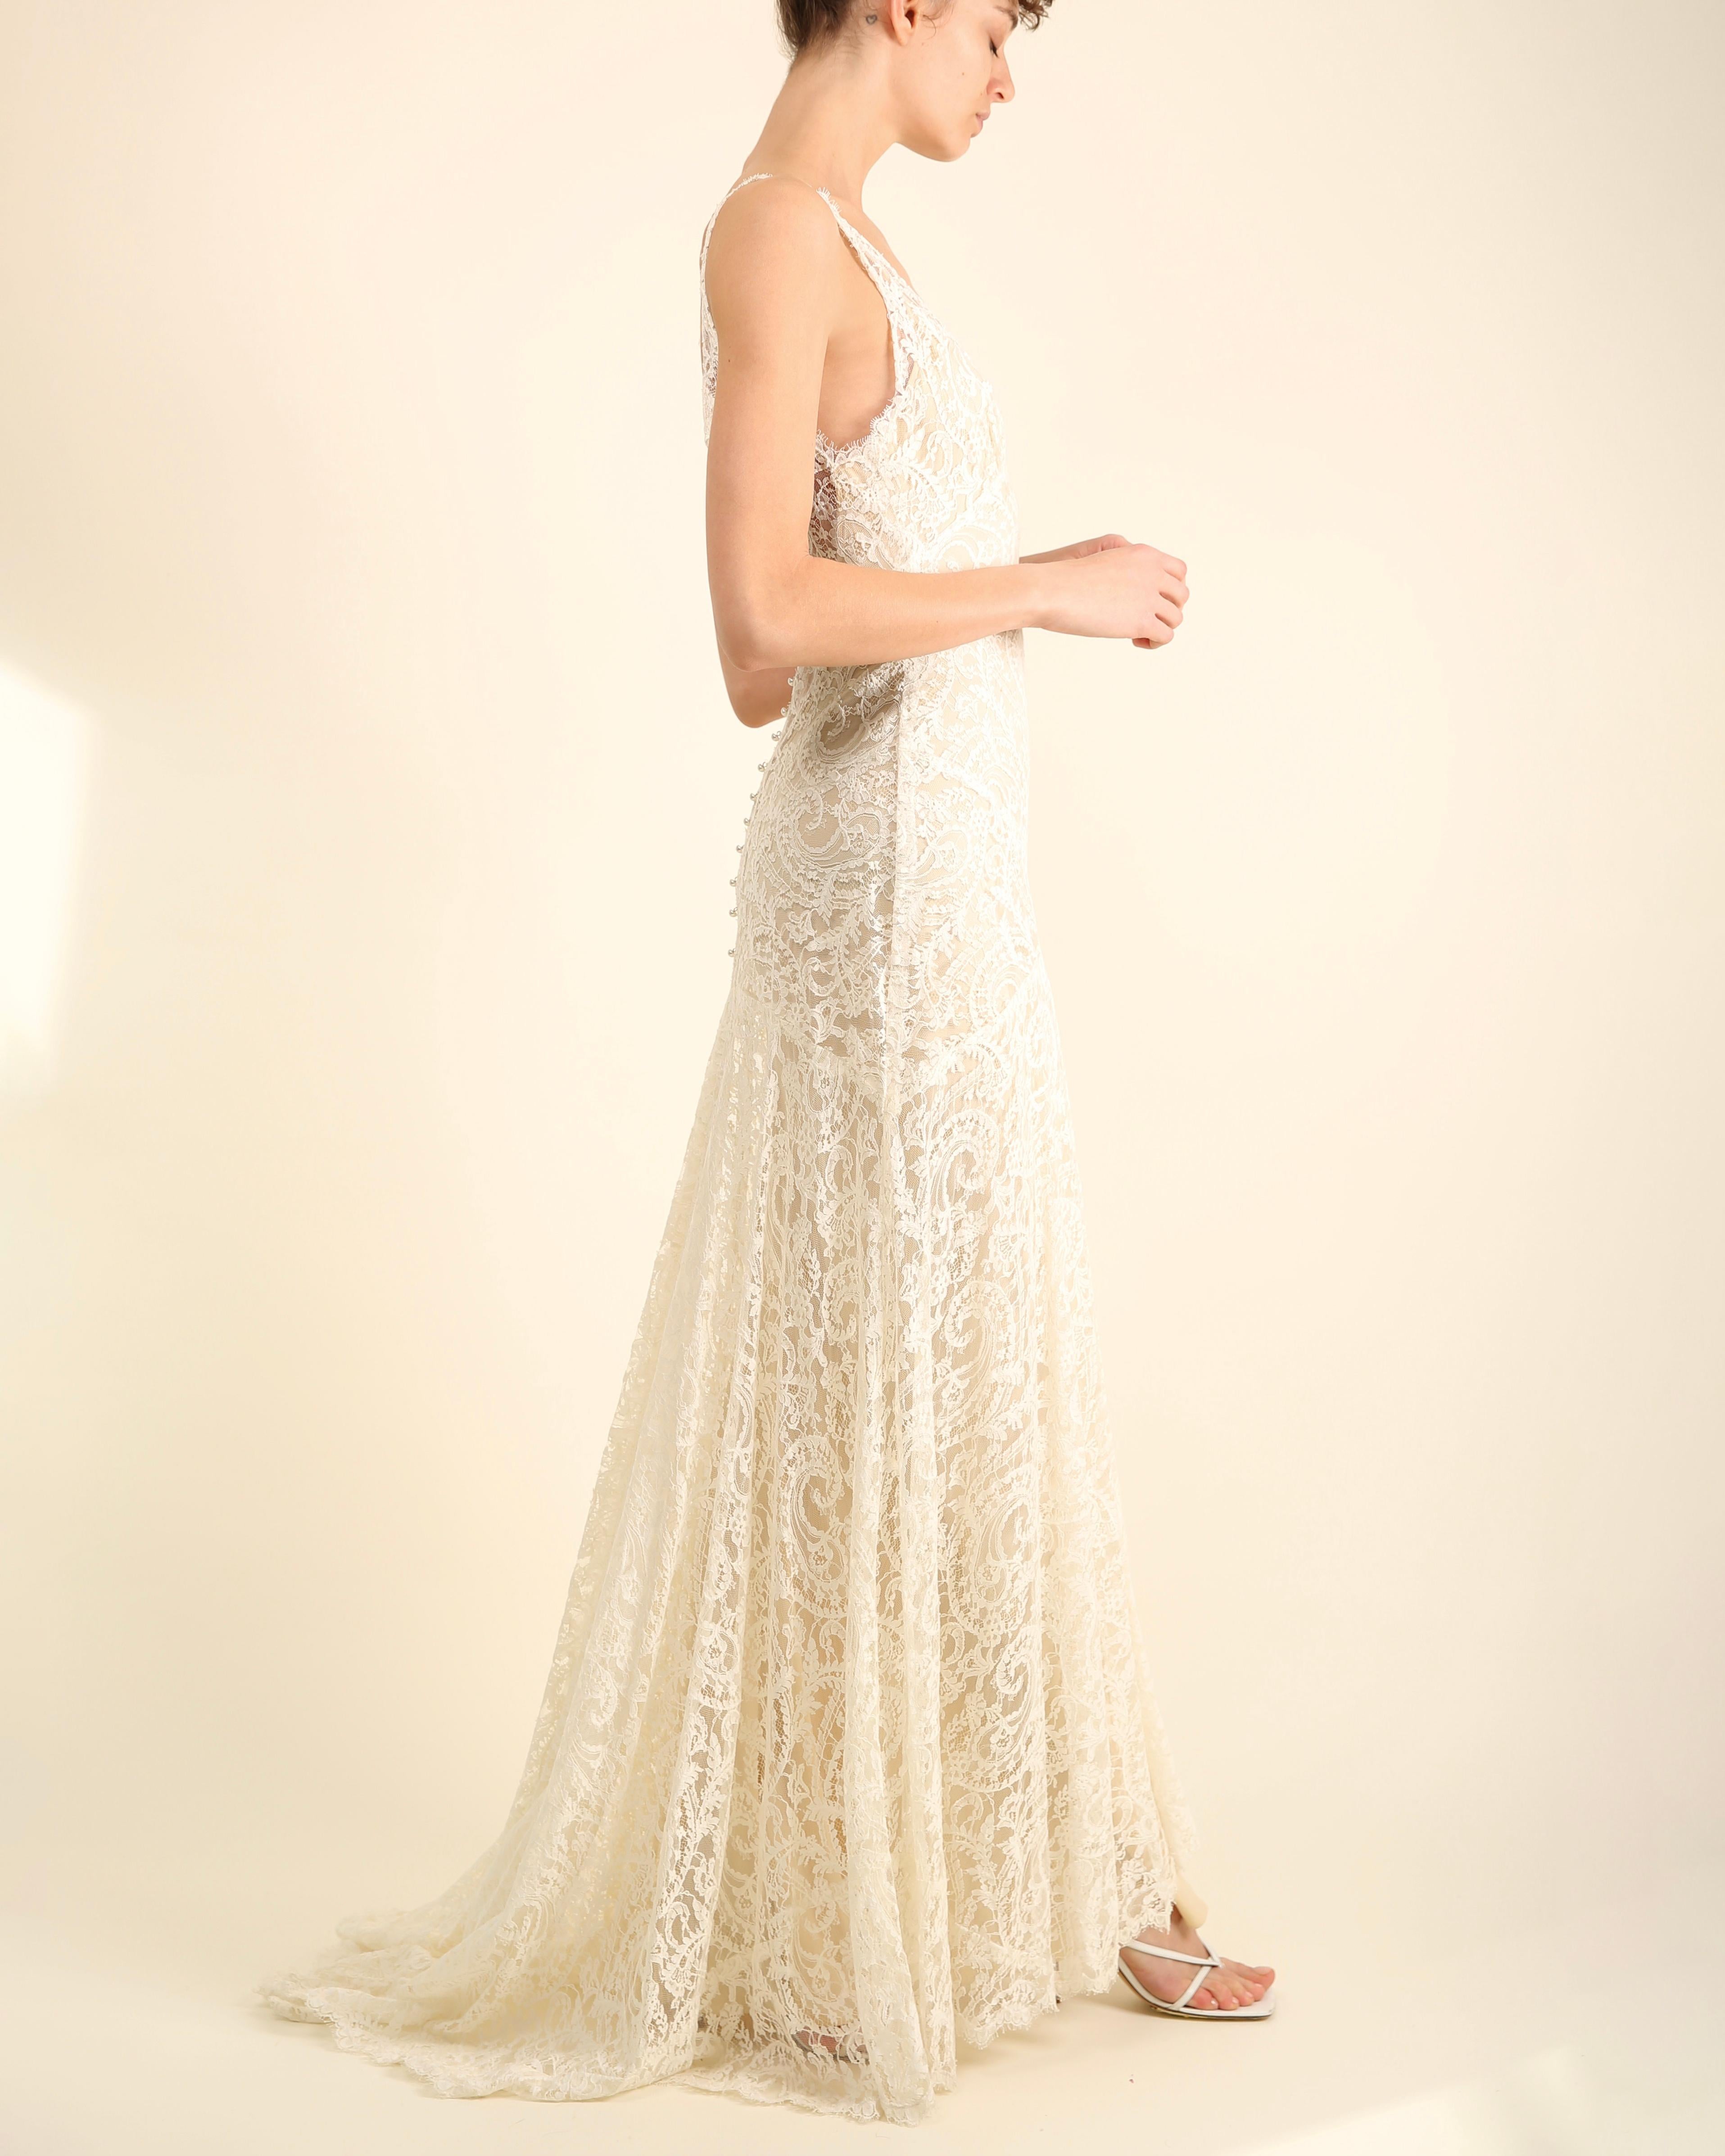 Monique Lhuillier ivory lace plunging backless wedding gown with train dress  11